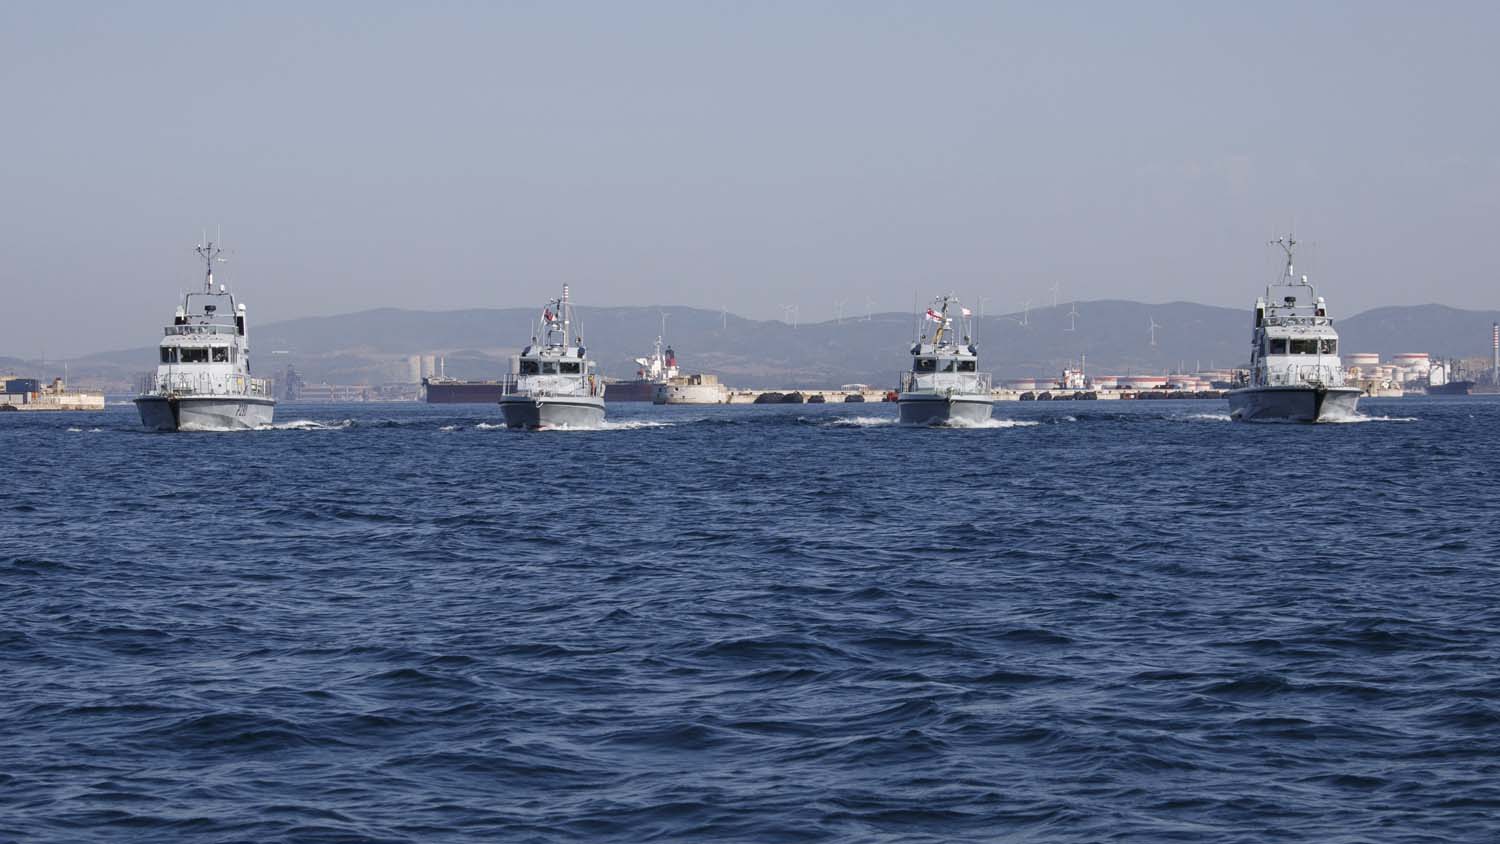 Spain wants to station its gendarmerie in Gibraltar